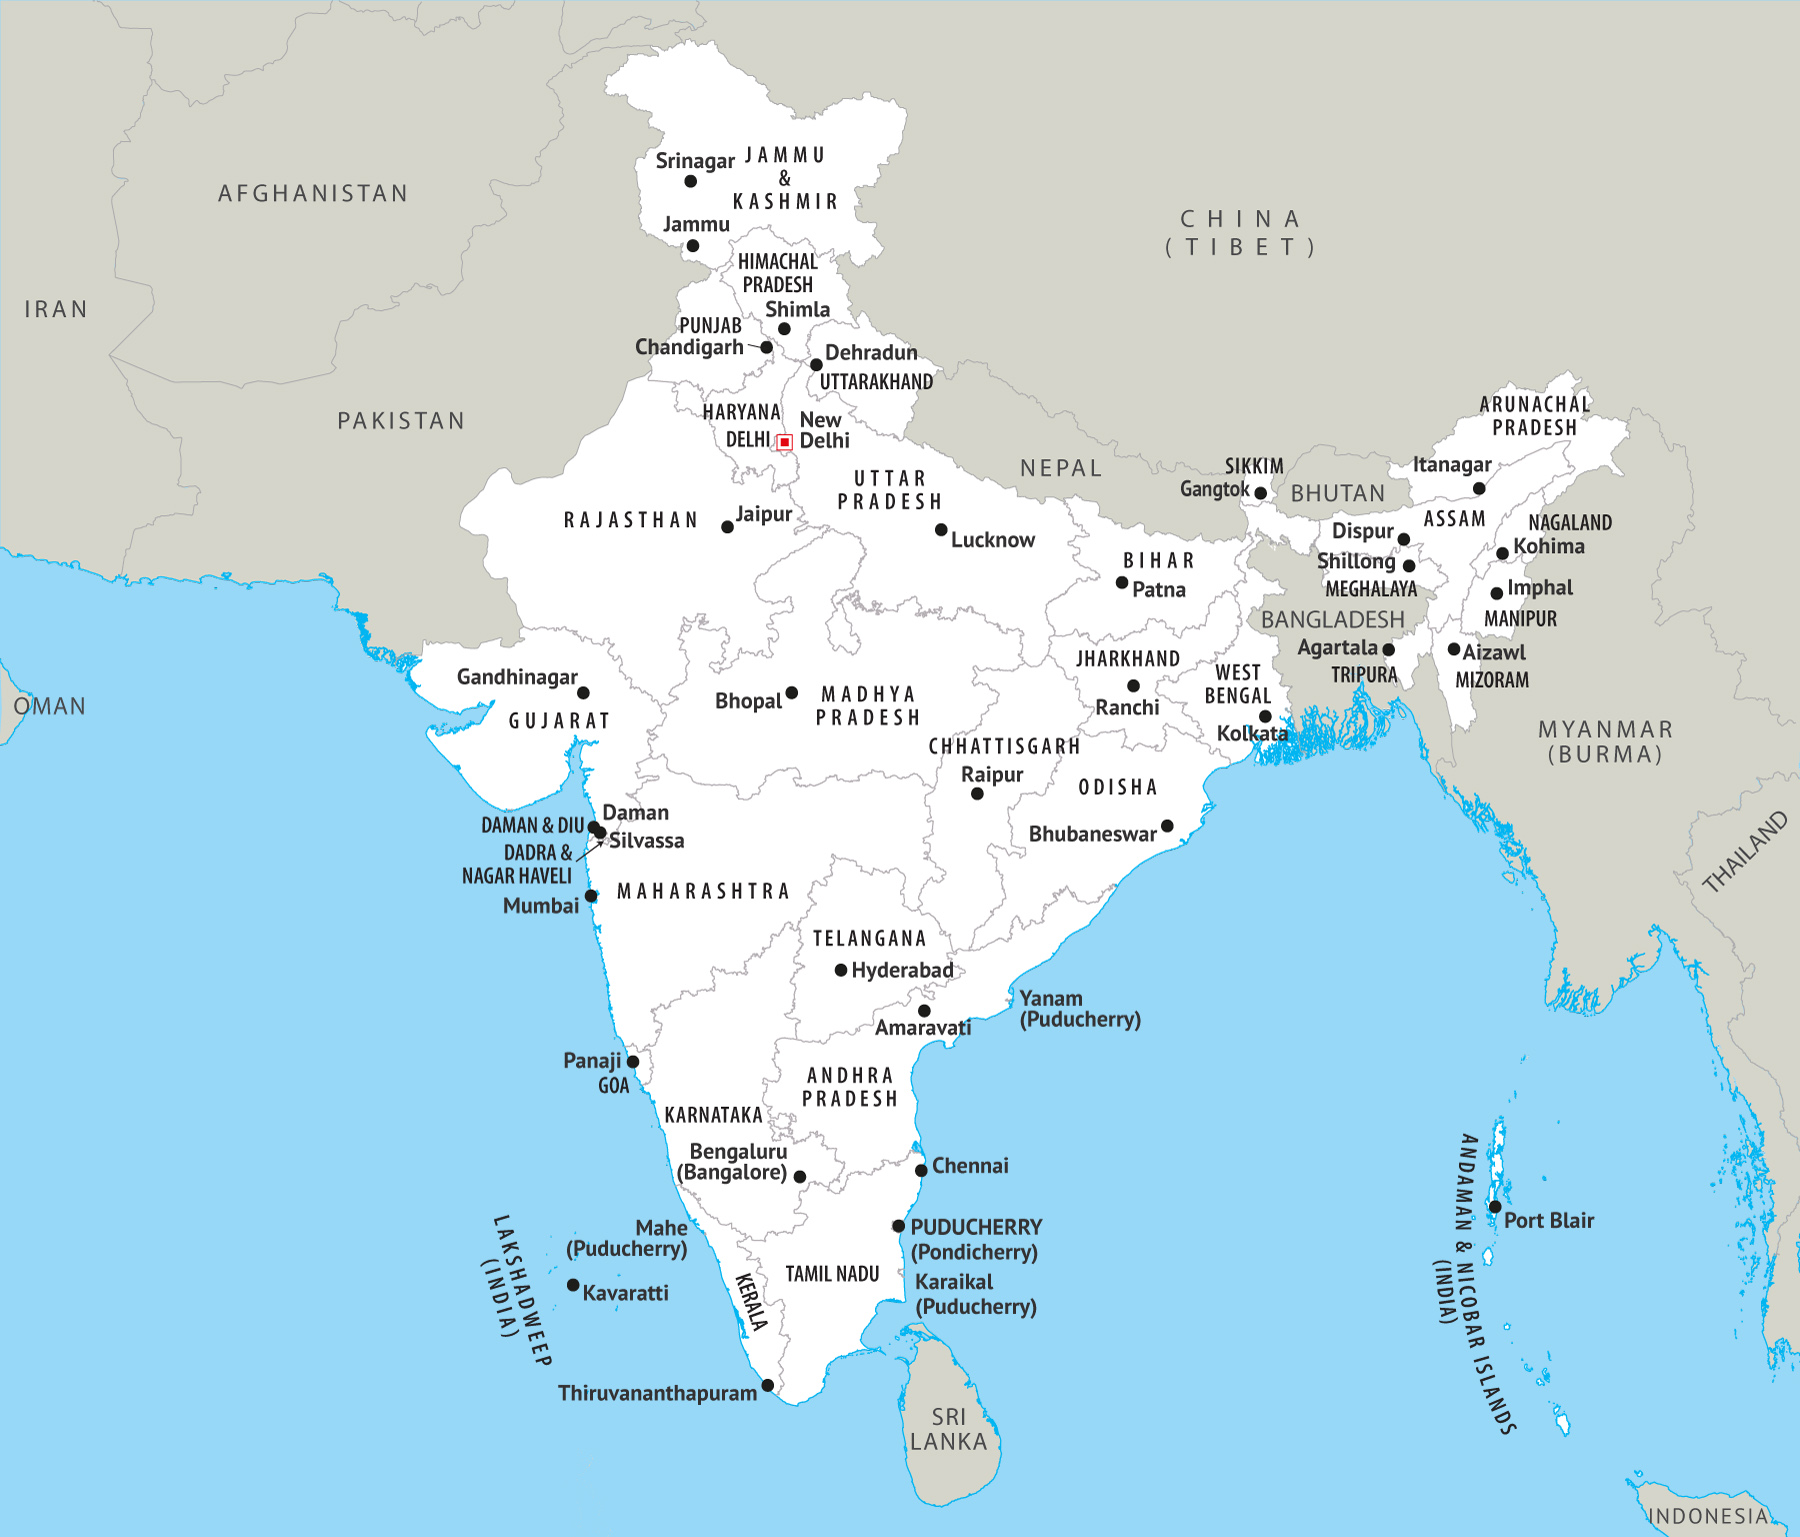 Elections in India | 2019 elections in India1800 x 1537